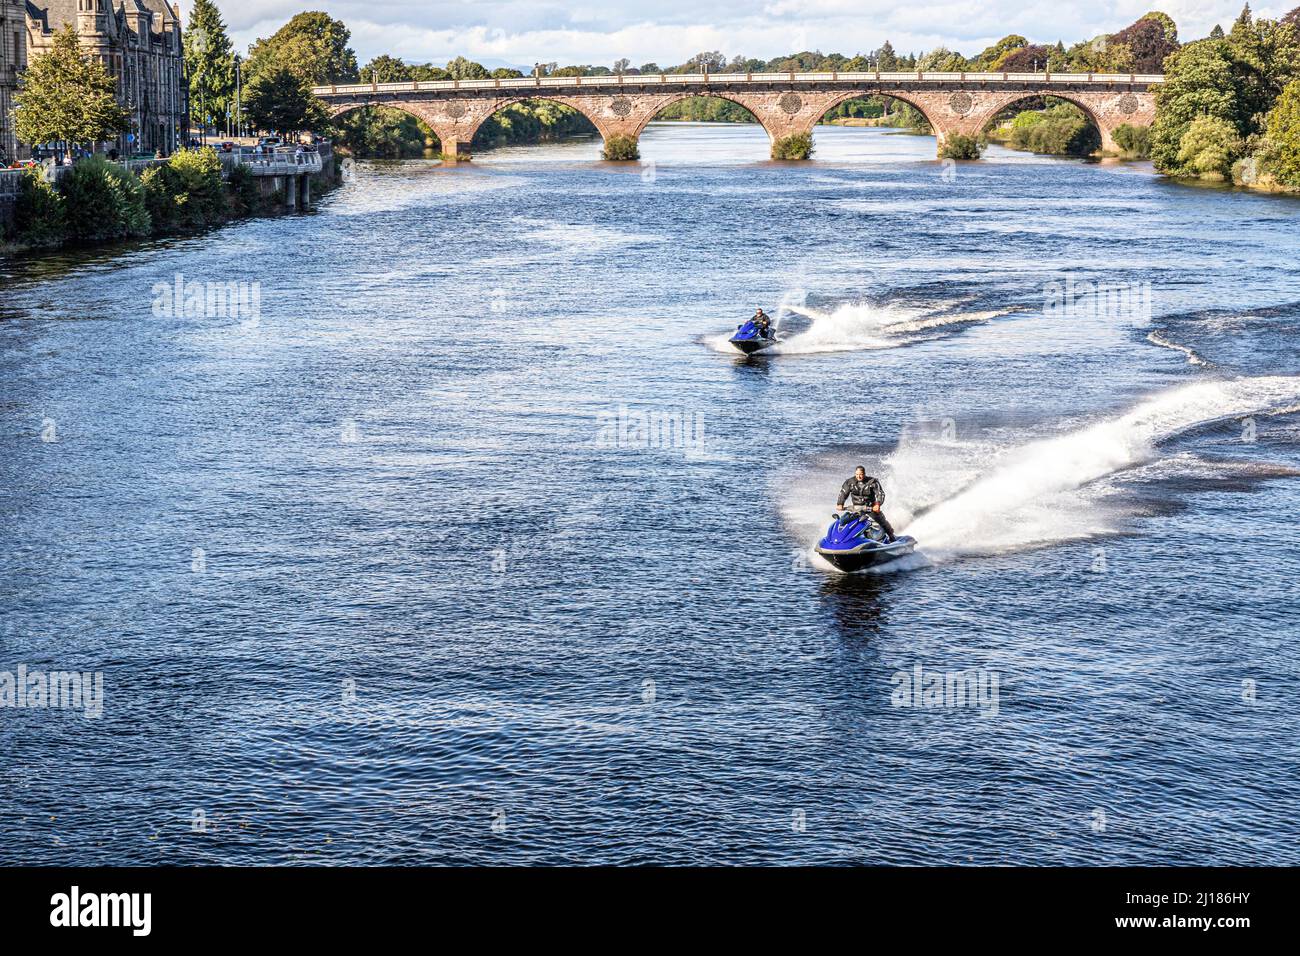 Jetskiing on the River Tay on a peaceful Sunday afternoon in the centre of the city of Perth, Perth and Kinross, Scotland UK Stock Photo